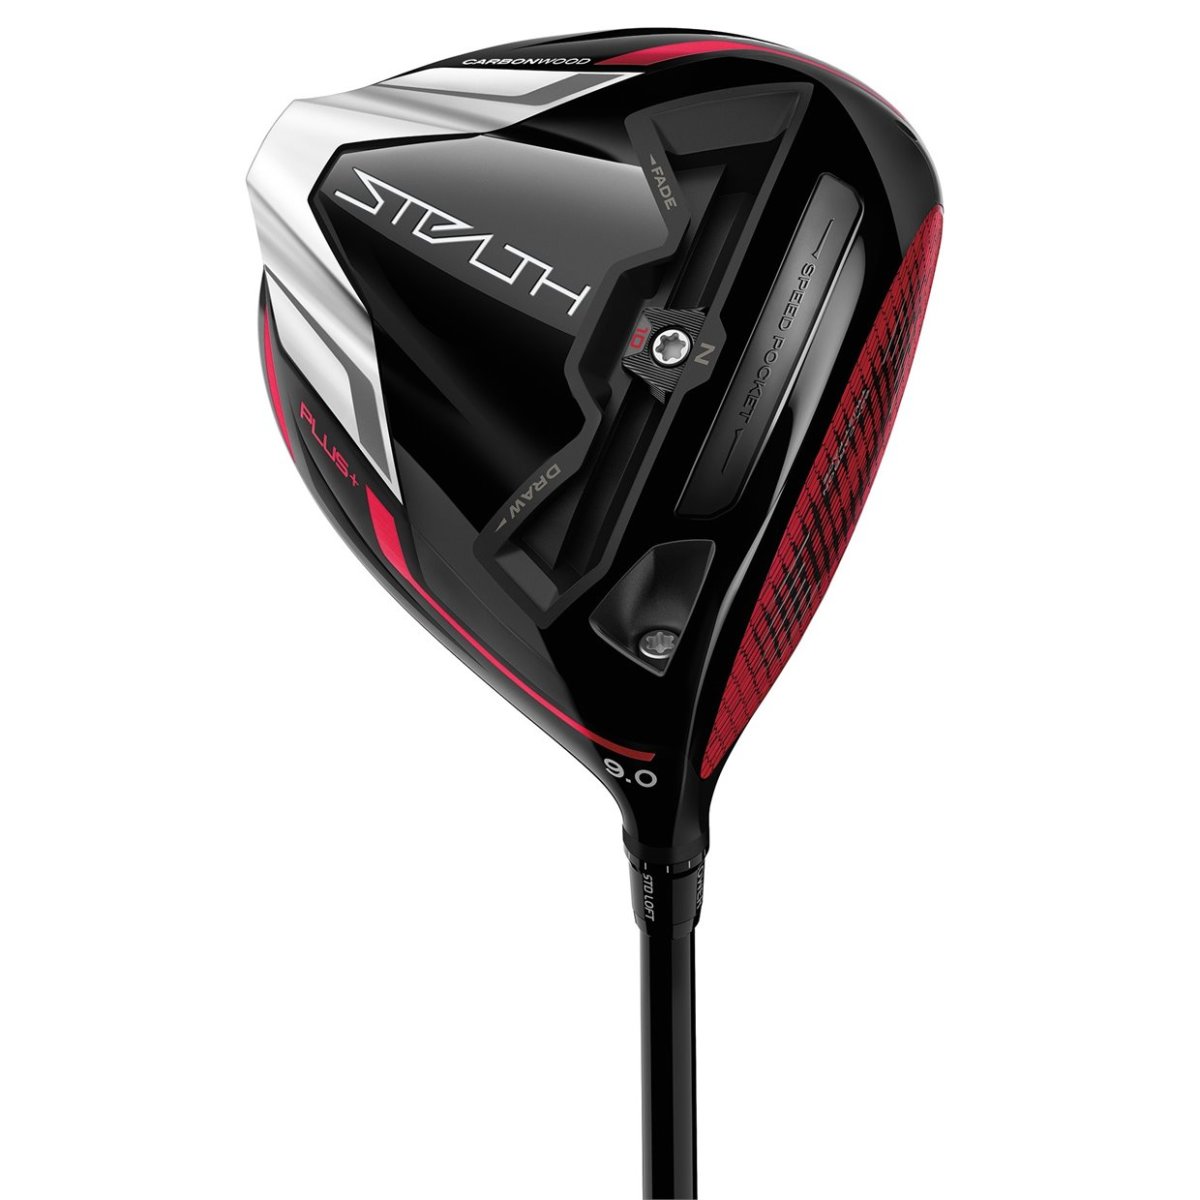 Find the TaylorMade Stealth Plus driver in Morning Read's online pro shop, powered by GloblaGolf.